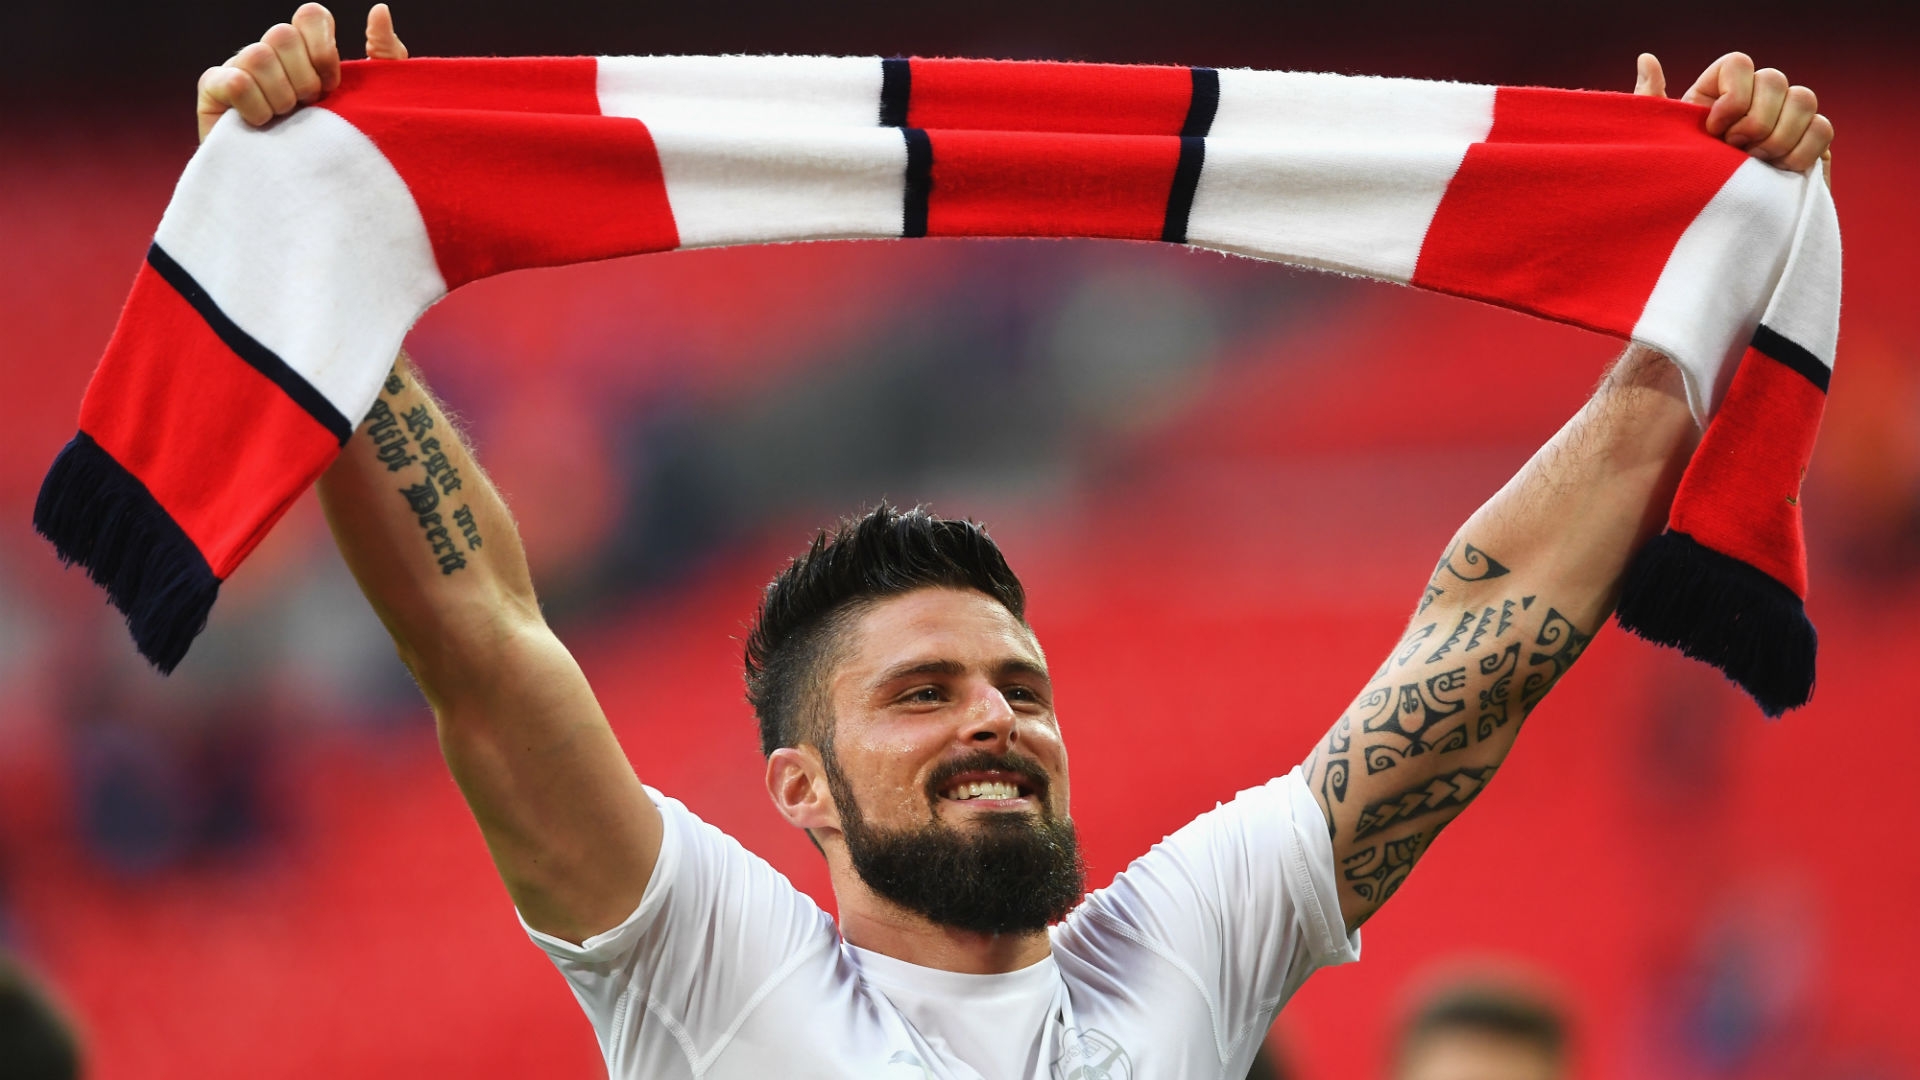 Olivier Giroud is Arsenal's main striker, but reports suggested the player could be headed to EPL side West Ham United.